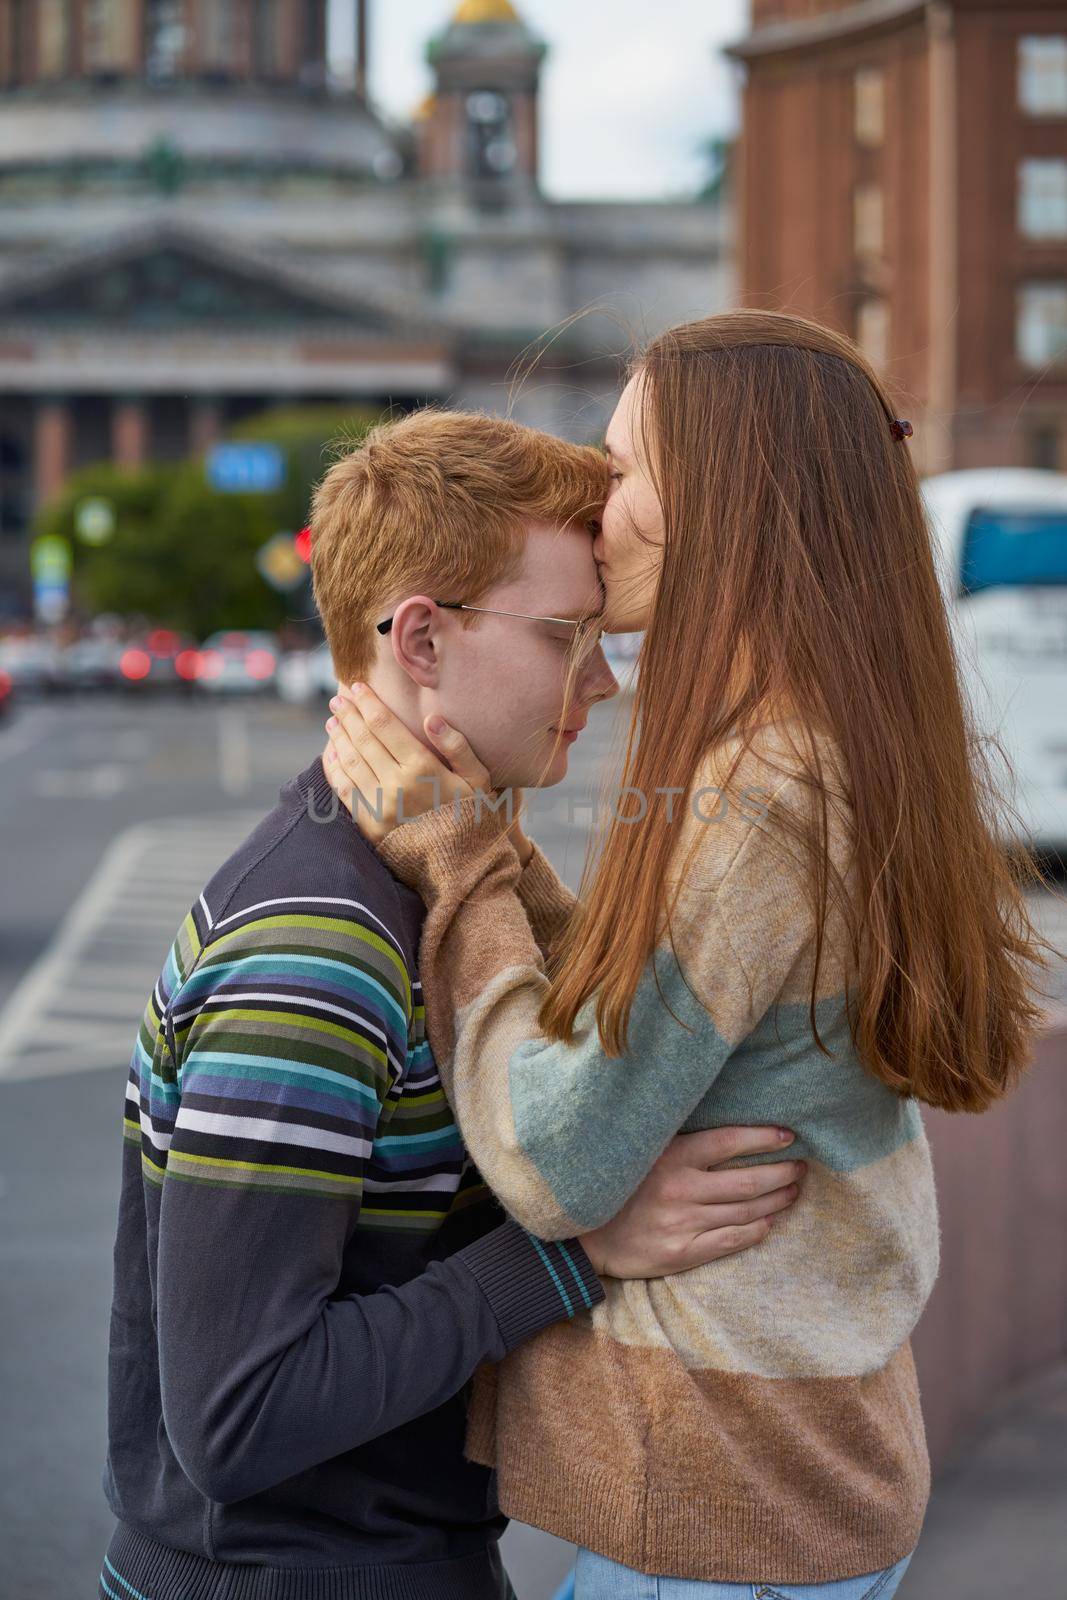 red-haired woman kisses a man on the top of her head, a woman with long dark thick hair in a sweater soothes and comforts a boy by NataBene